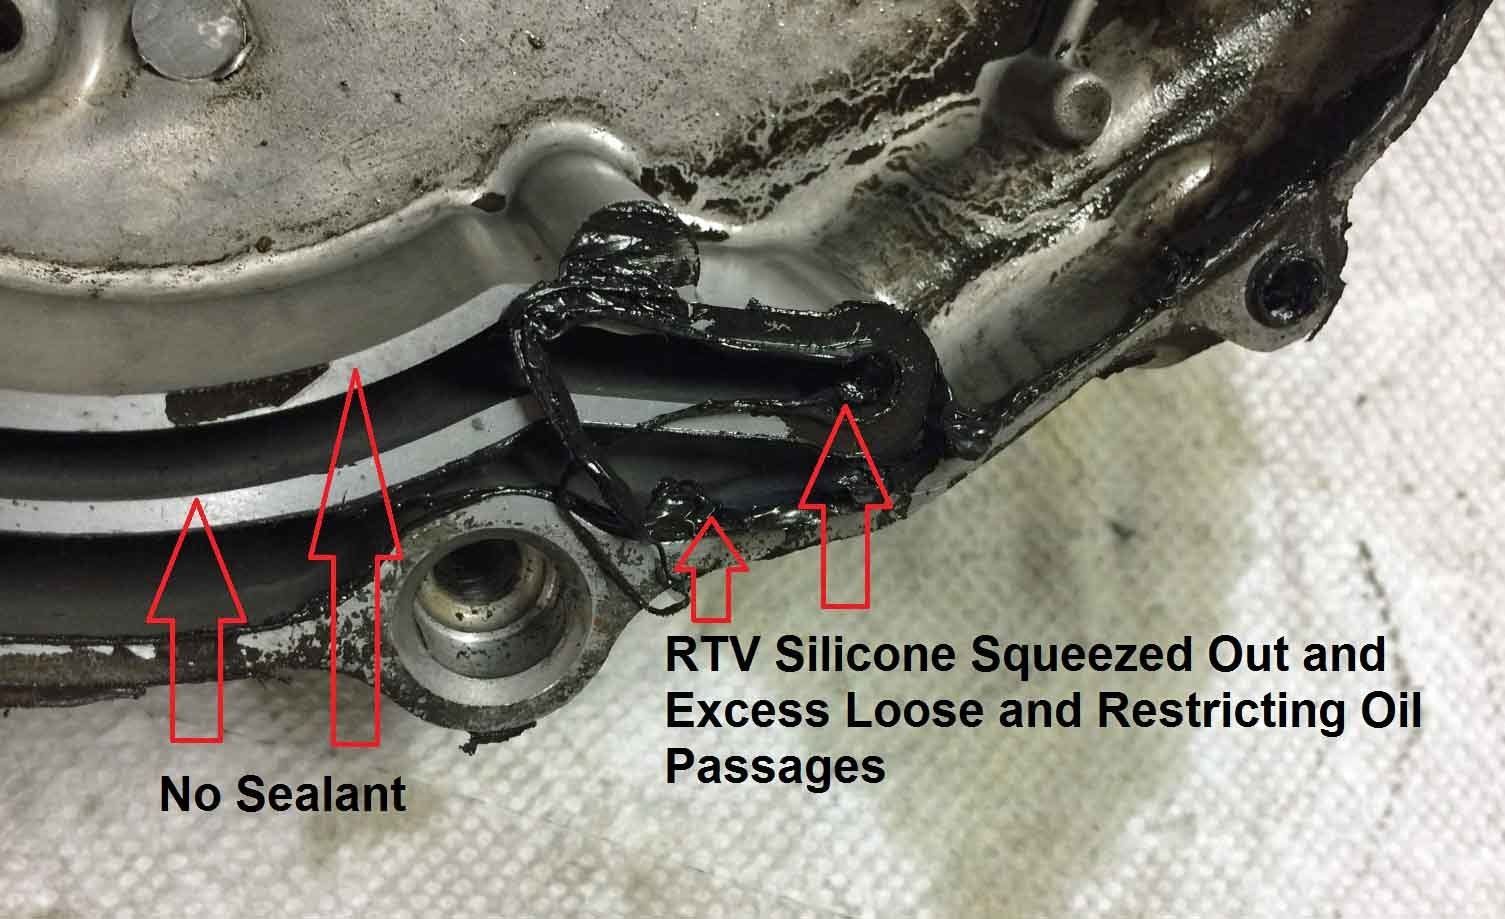 Gasket sealer squeezed out - Excess loose restricting oil passage